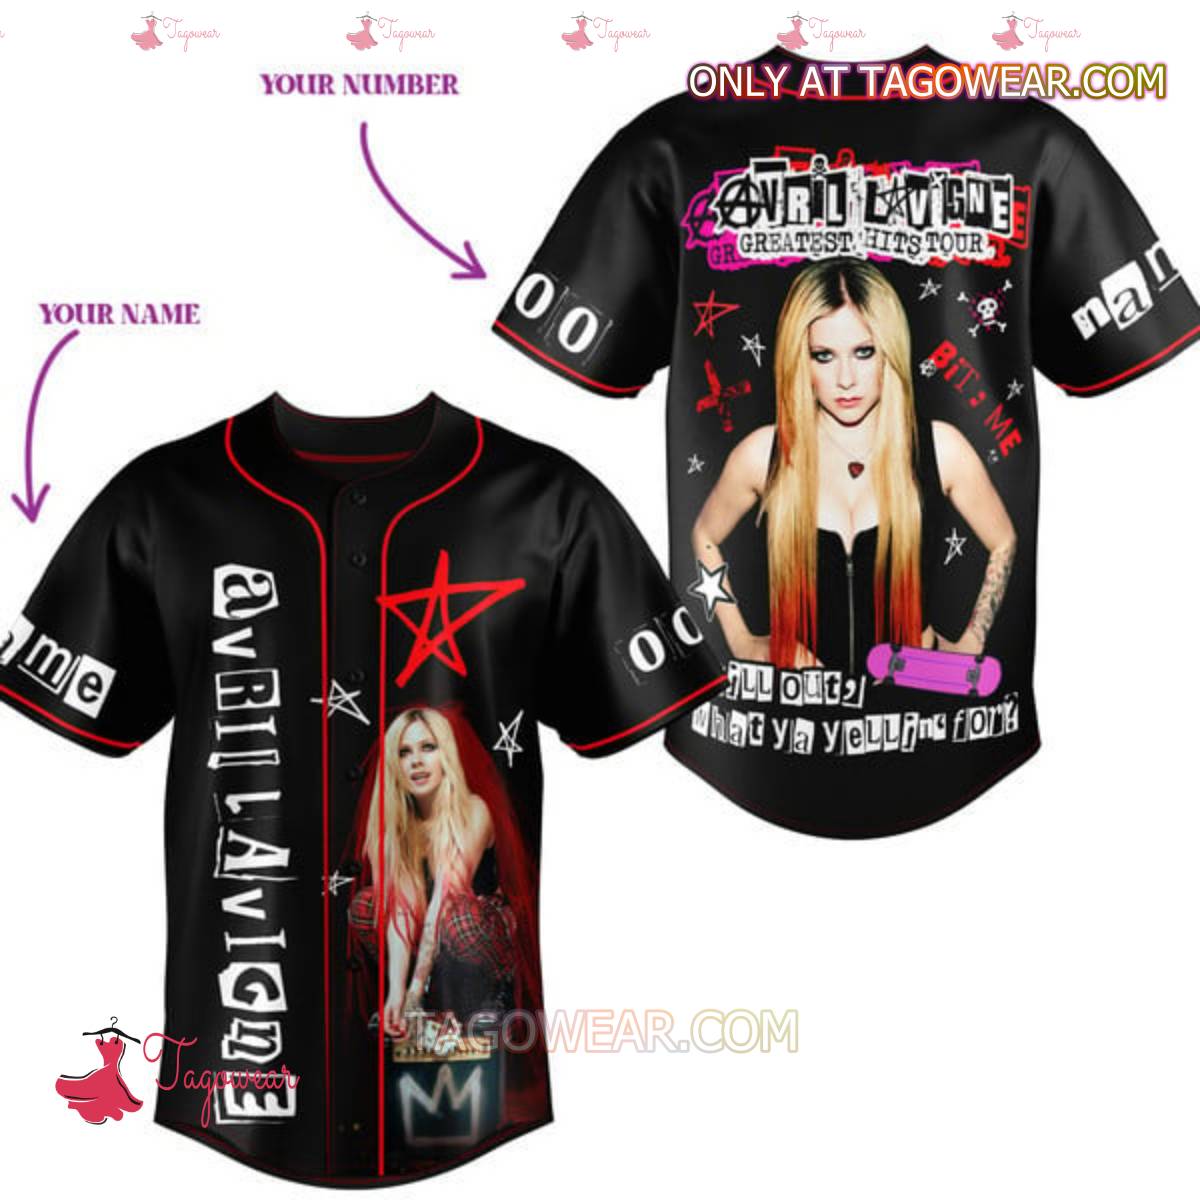 Avril Lavigne Greatest Hits Tour Chill Out What Ya Yelling For Personalized Baseball Jersey